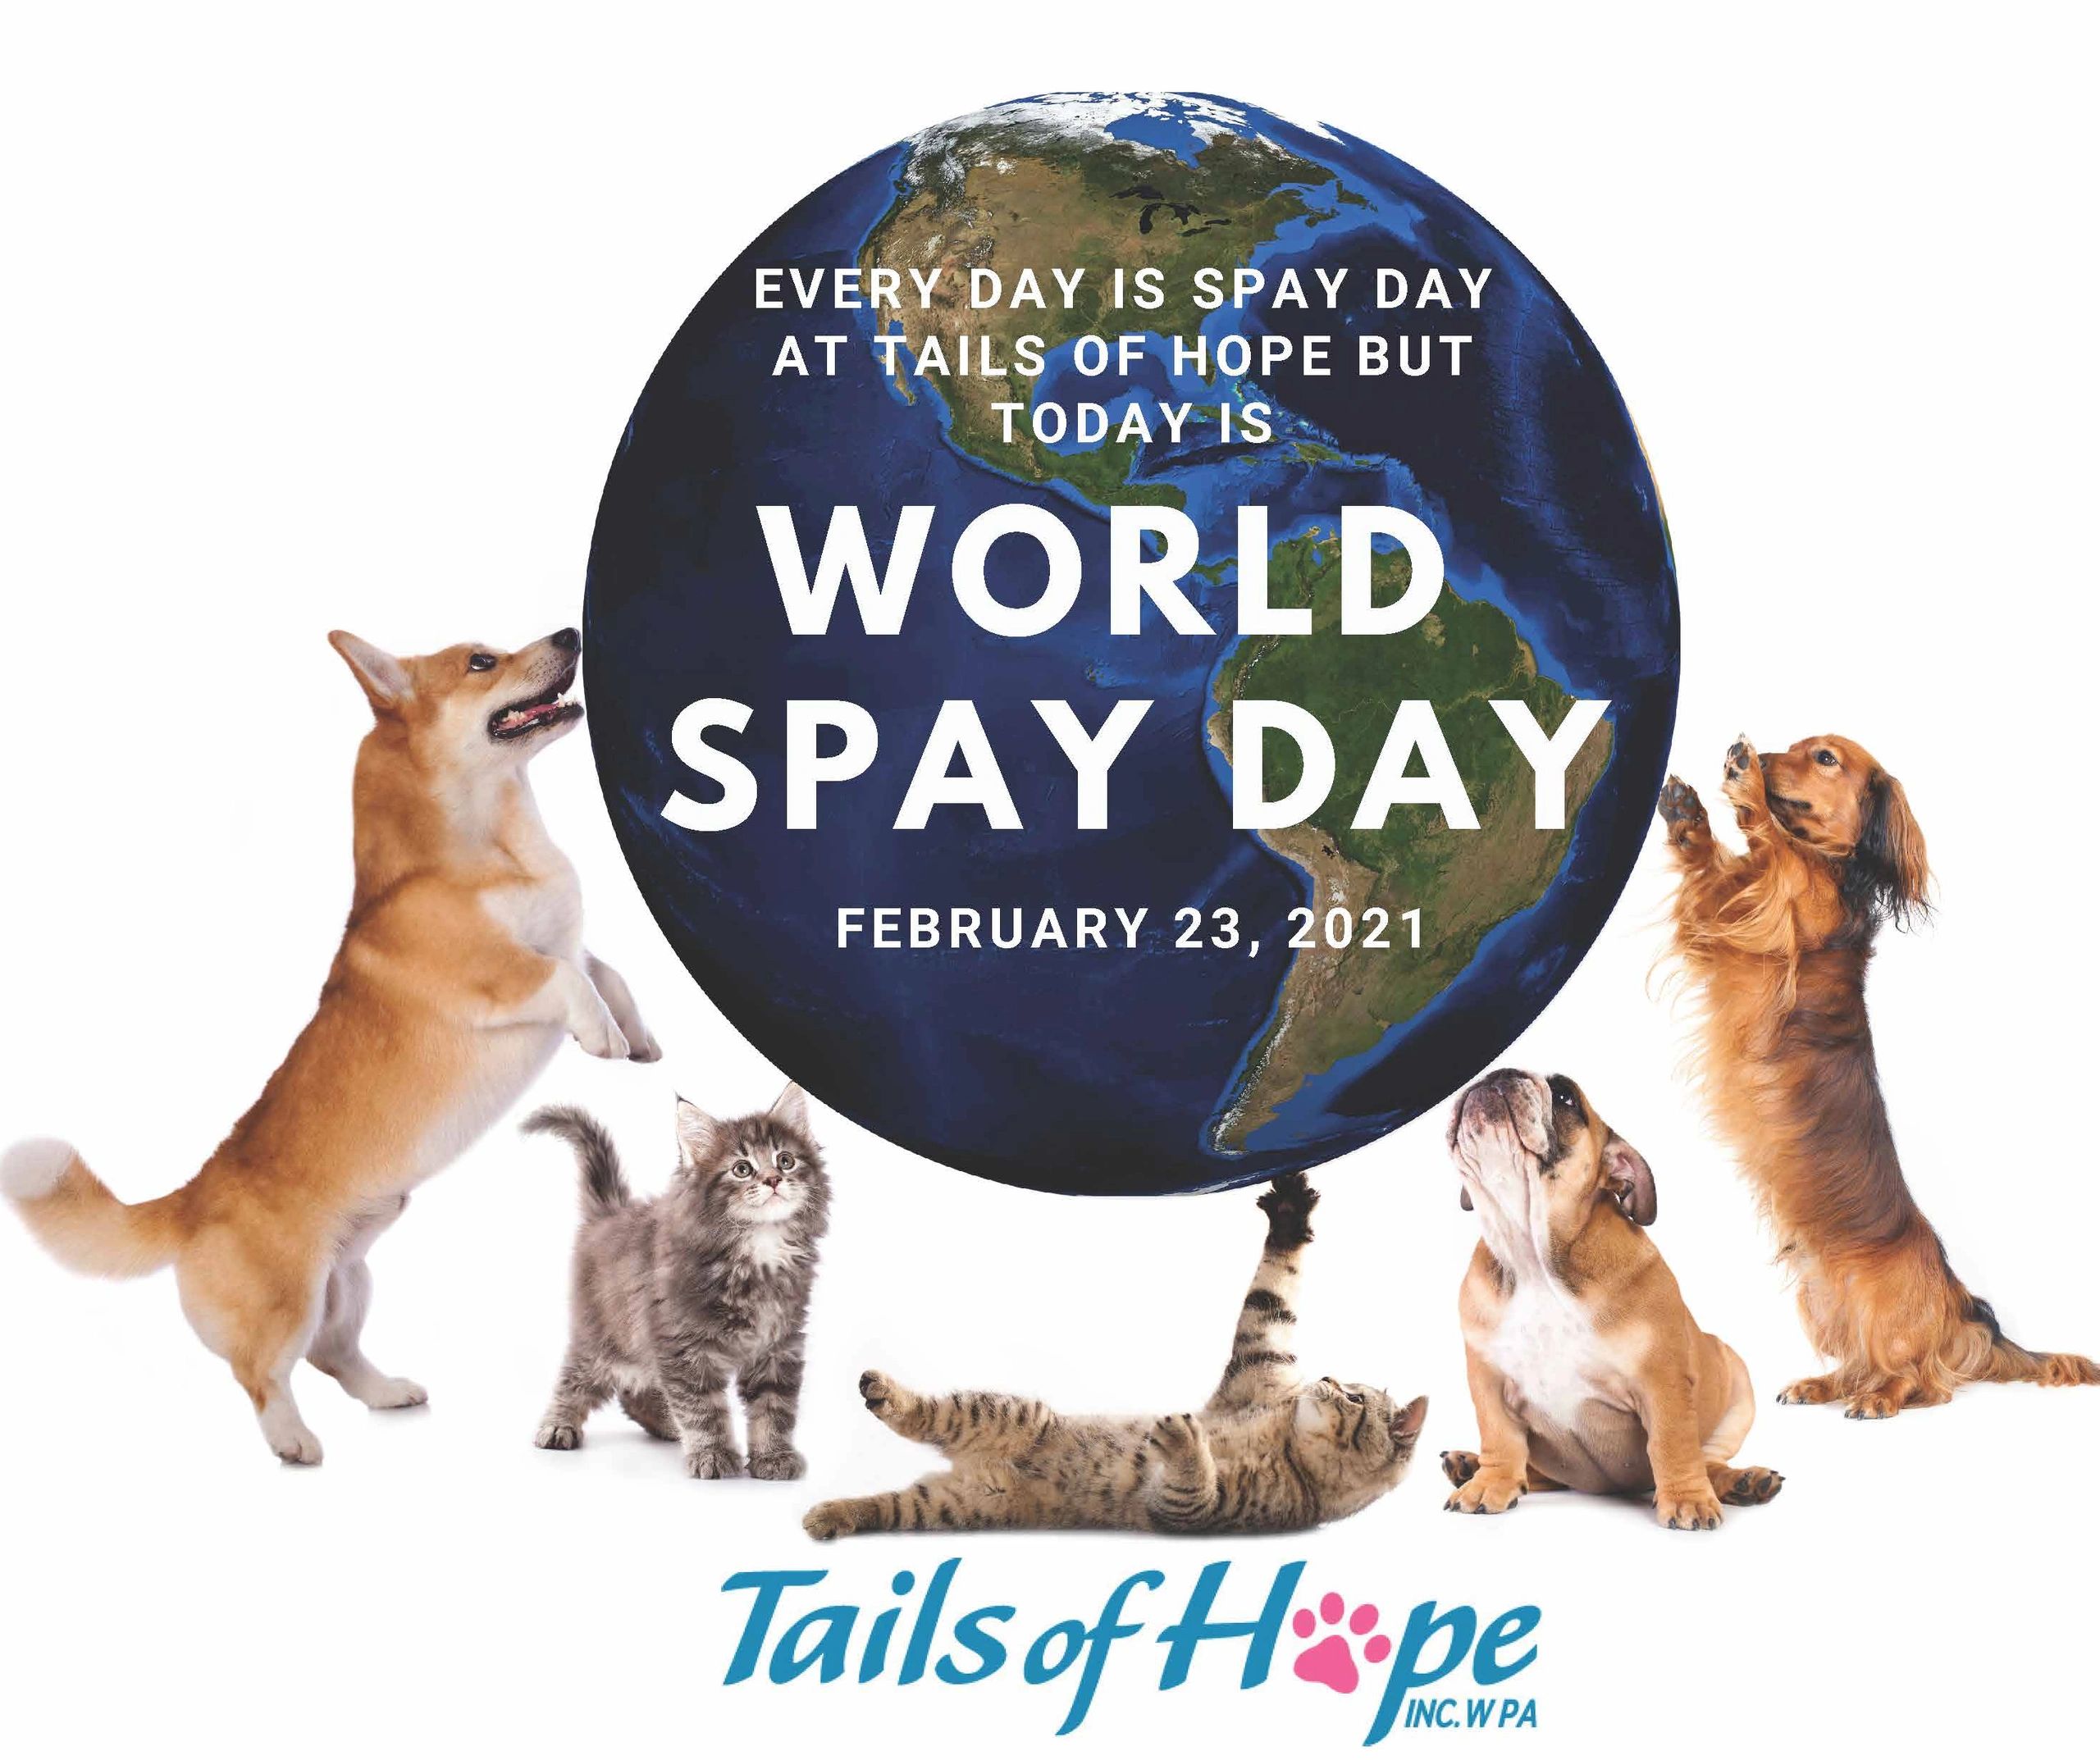 February 23rd is WORLD SPAY DAY